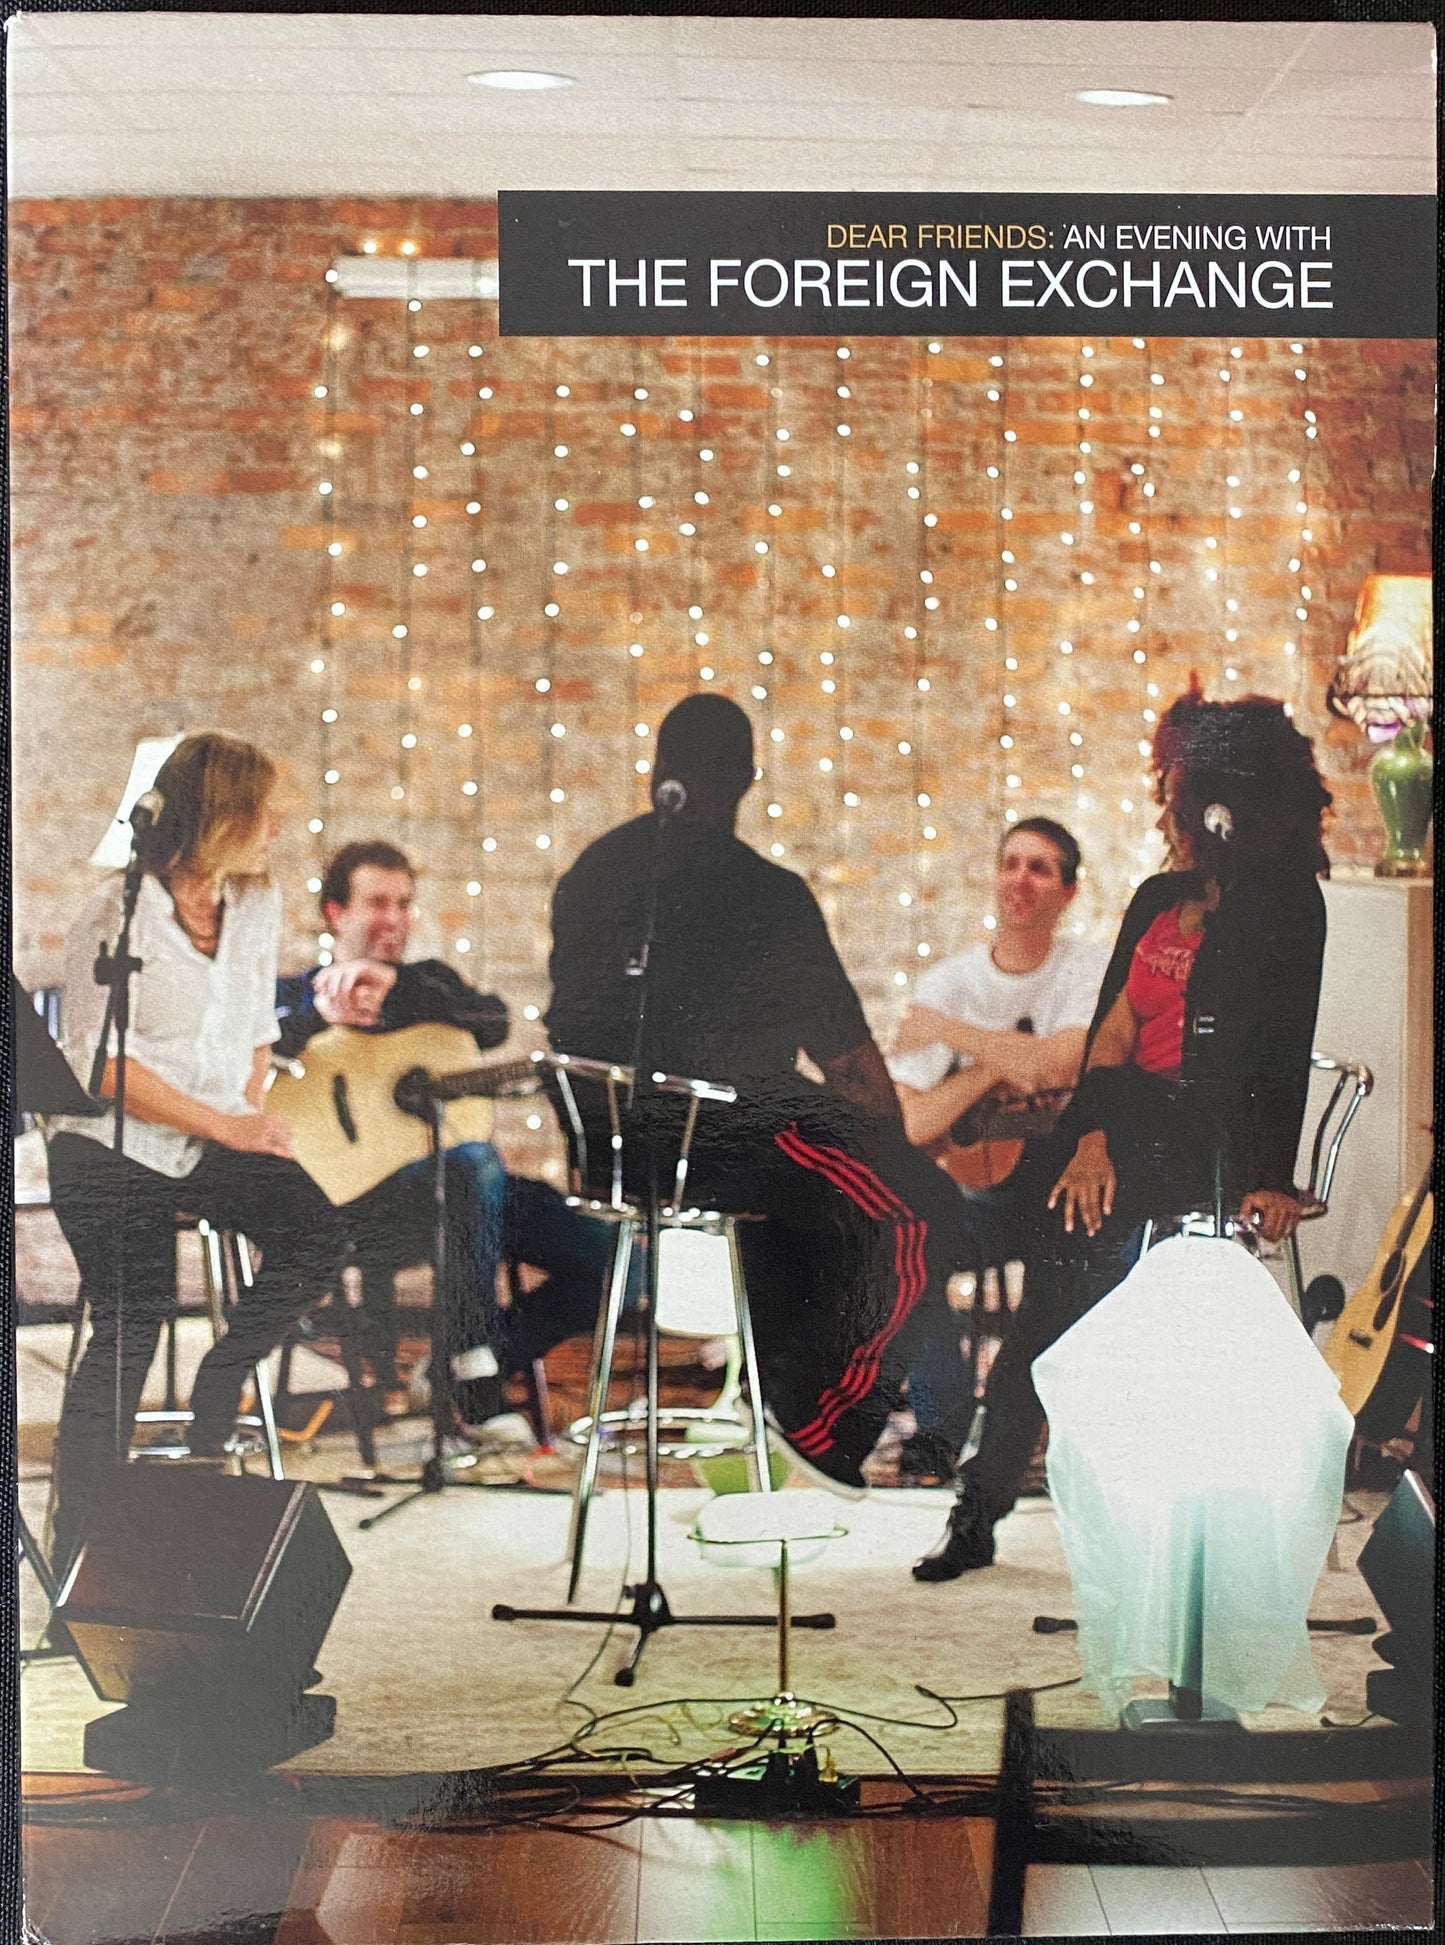 Dear Friends: An Evening with The Foreign Exchange